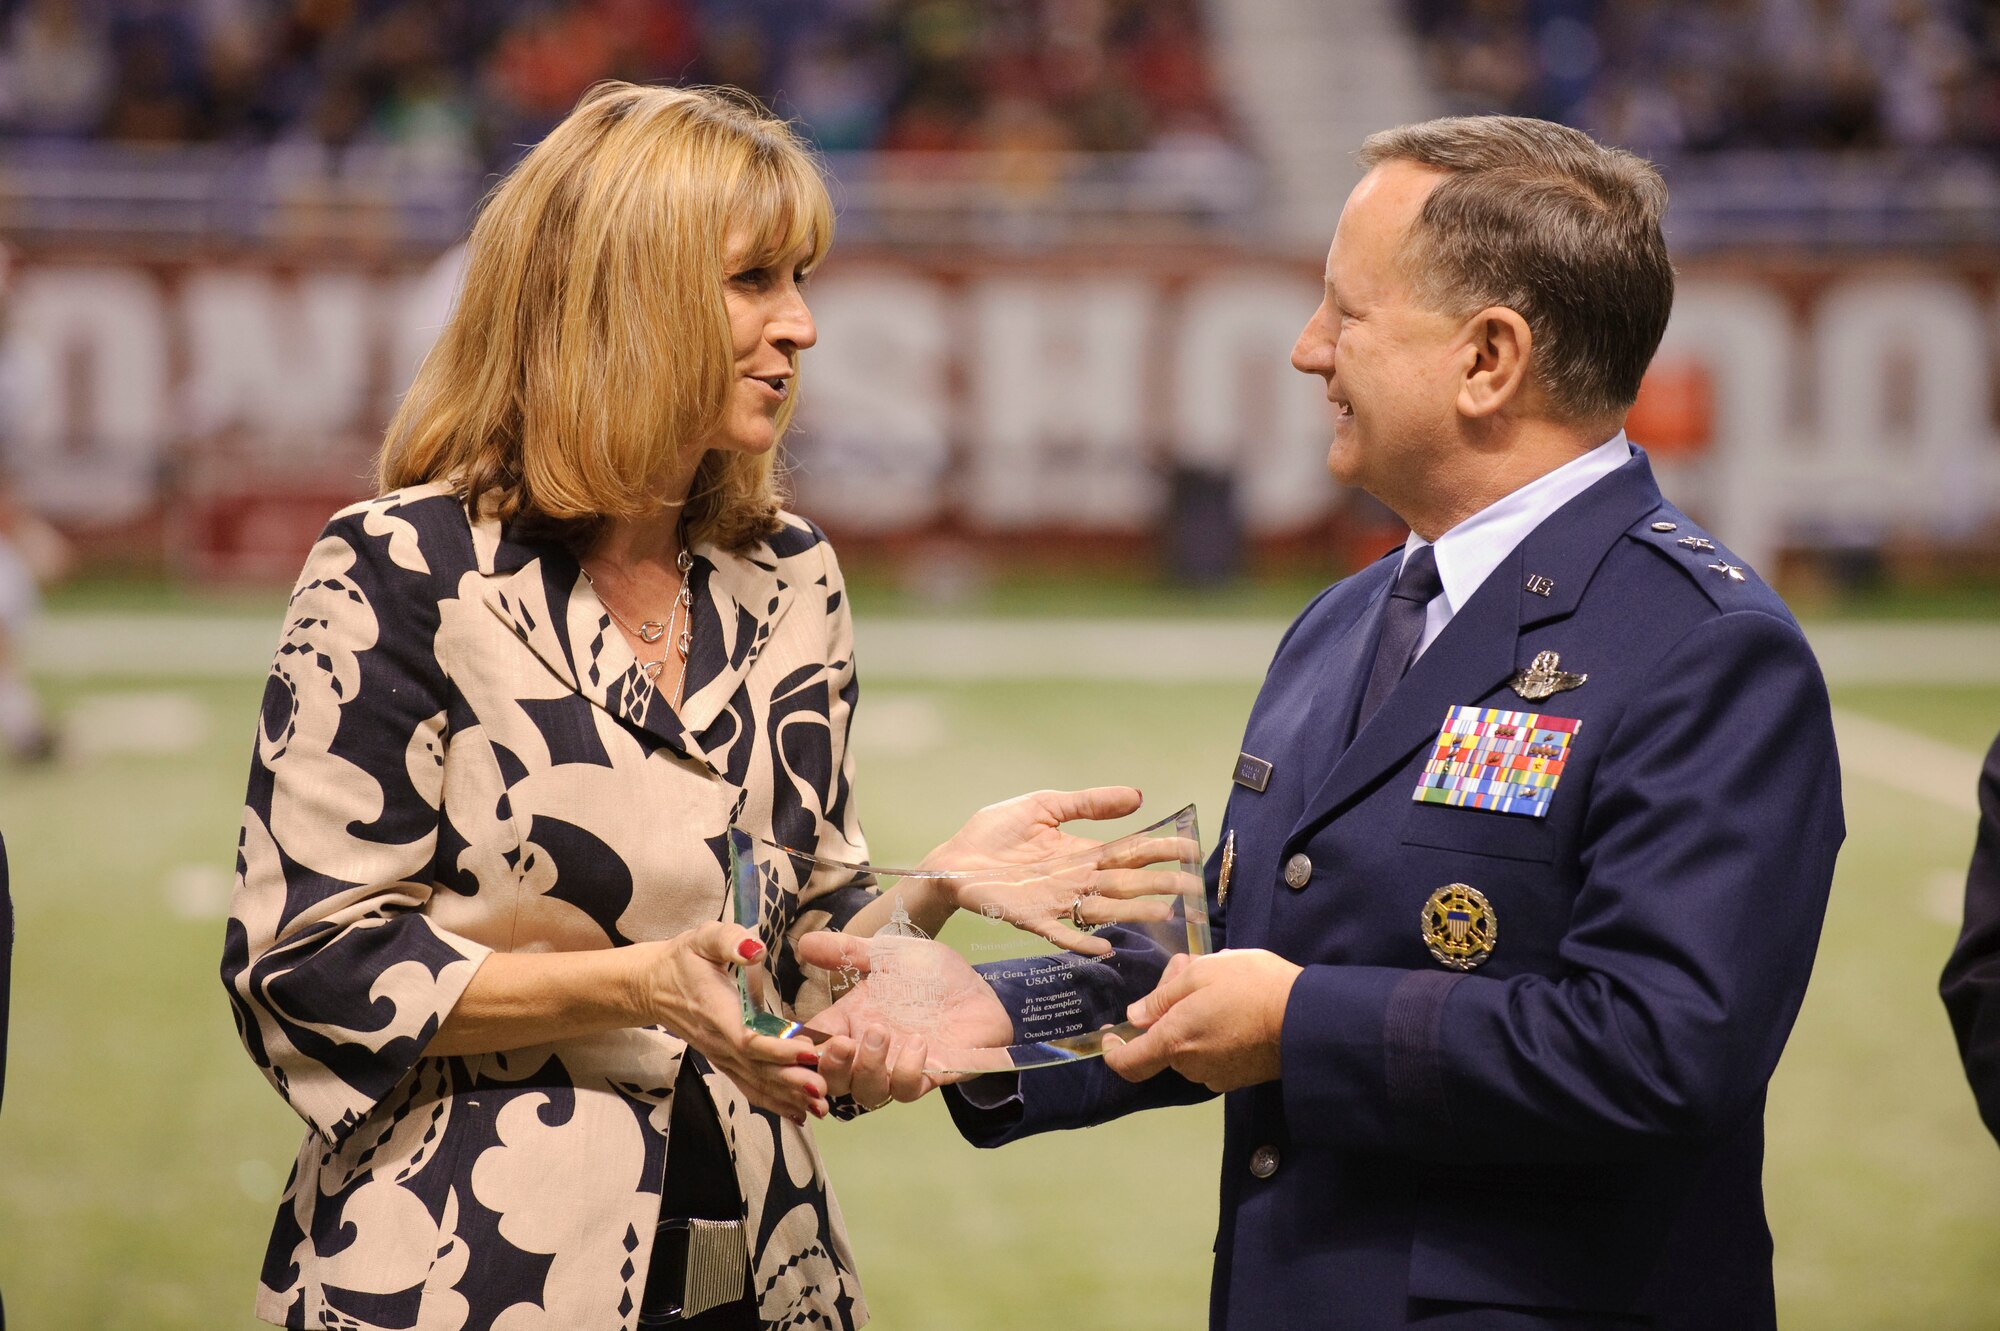 Holly Colman, president of the Notre Dame alumni association, presents Maj. Gen. Fred Roggero Air Force chief of safety with the Distinguished Alumnus Award which is presented in recognition of exemplary service to Notre Dame or community. General Roggero earned a bachelor of arts degree in government from the University of Notre Dame in 1976. (U.S. Air Force photo/Steve Thurow)